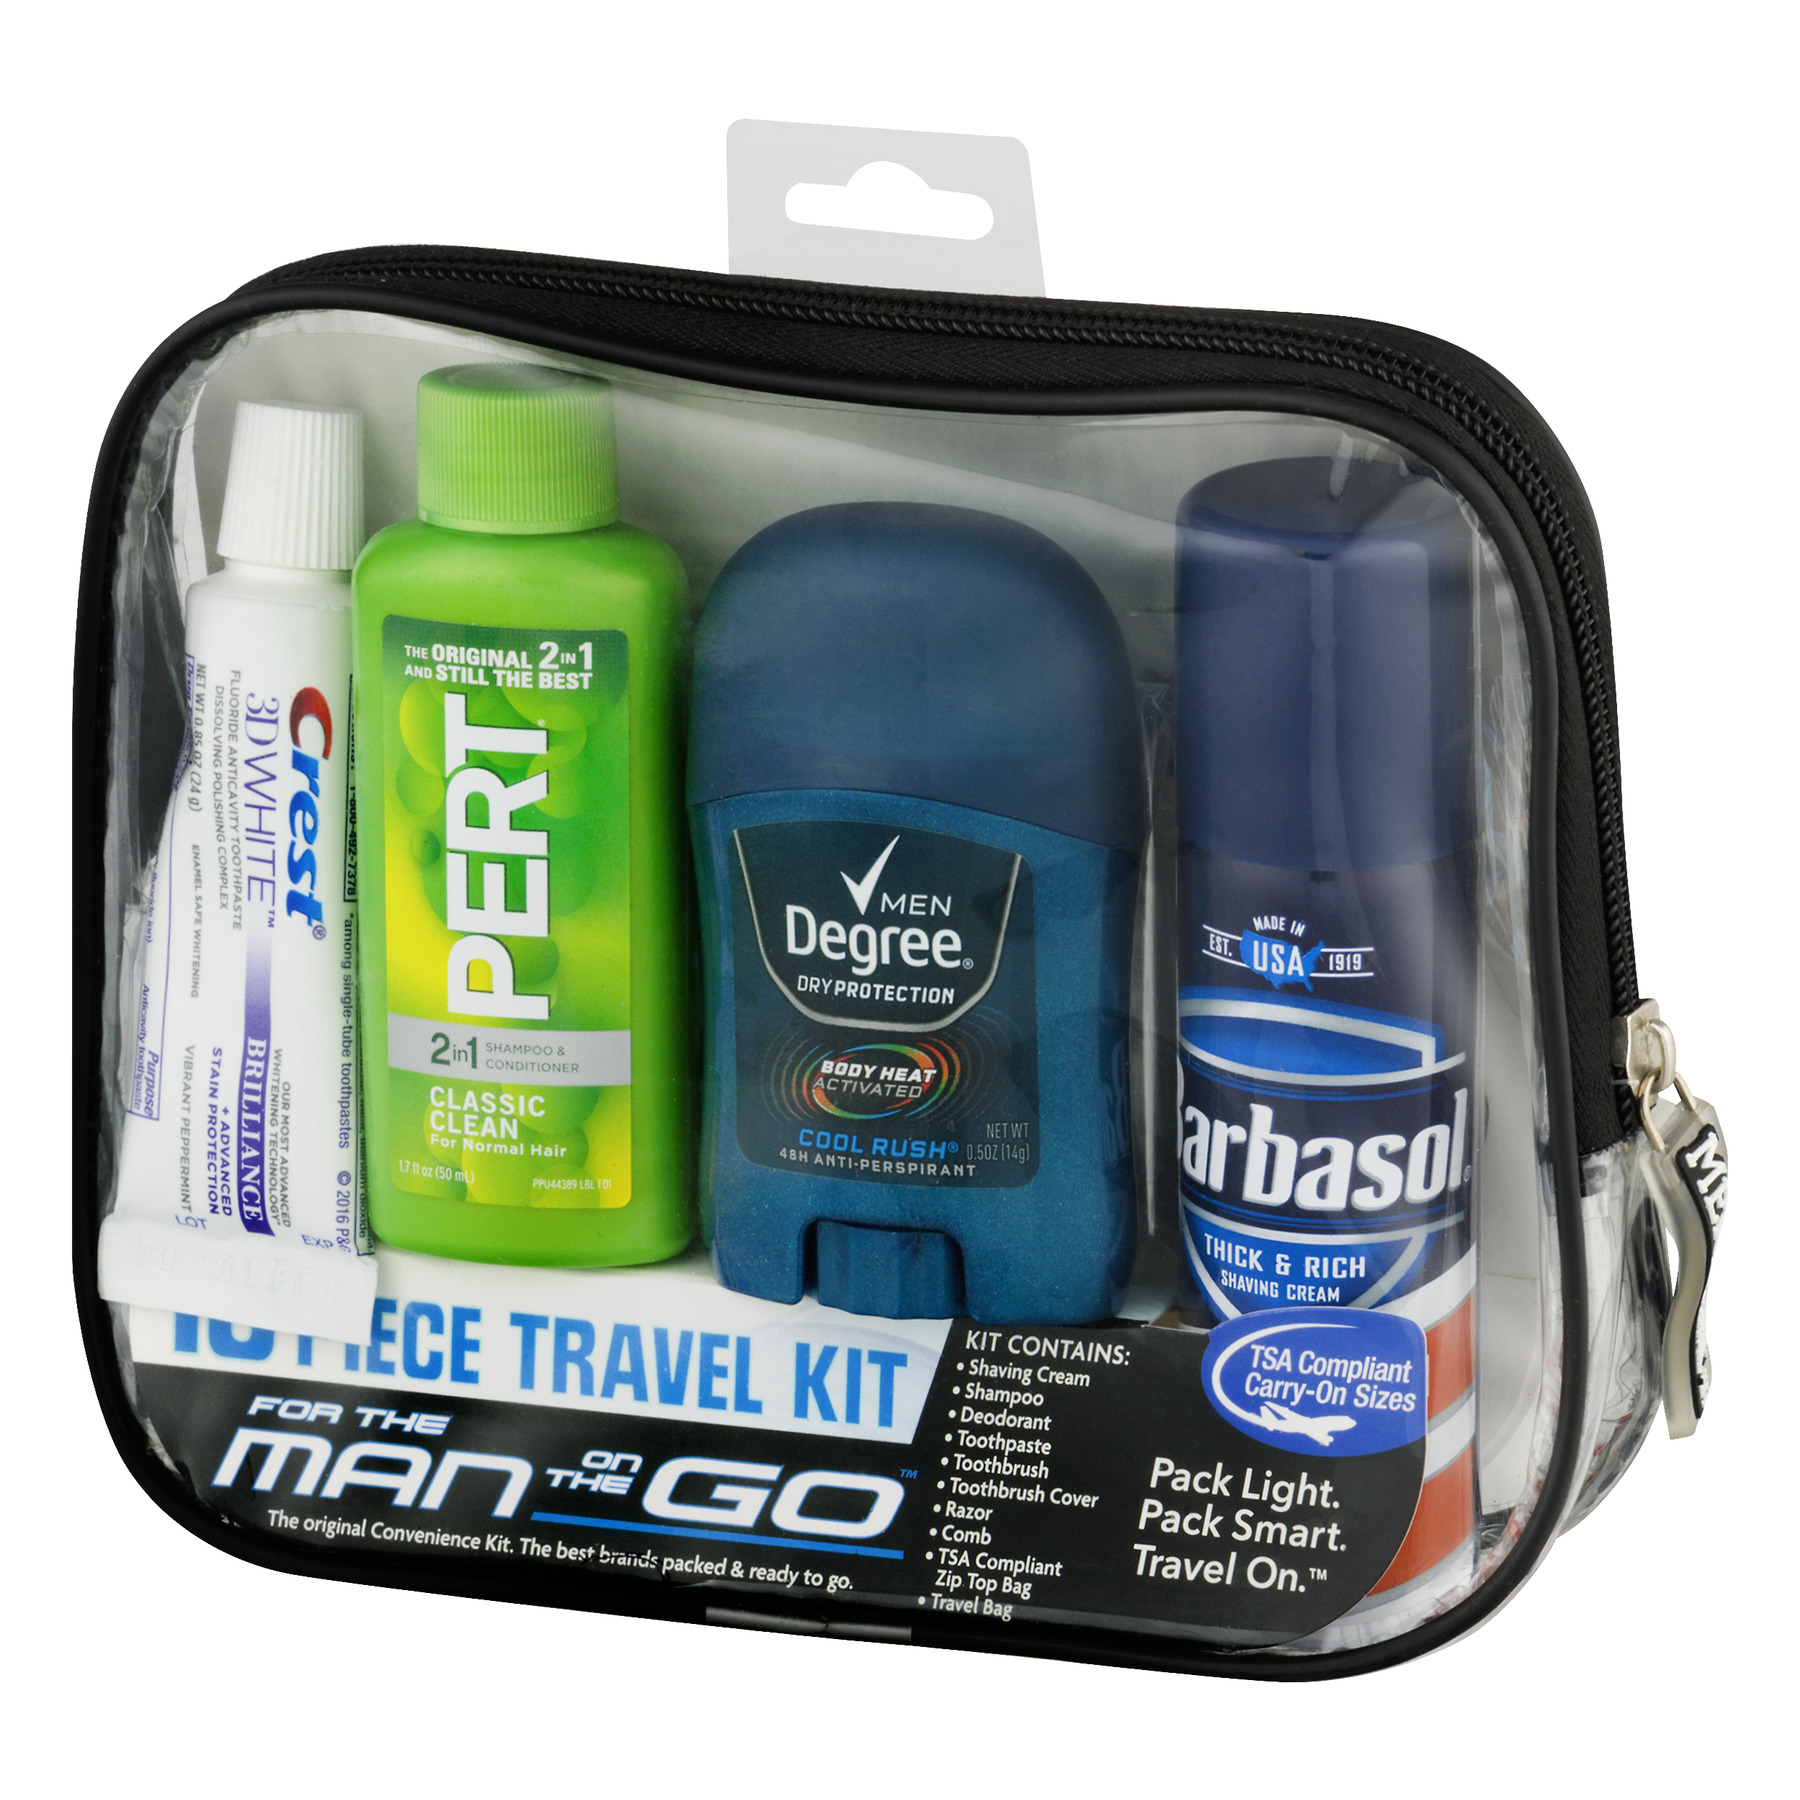 Convenience Kits International Men's Deluxe 10 Piece Travel Kit, TSA Compliant, in Reusable Clear Zippered Bag Featuring: Barbasol Shave Cream - image 3 of 5